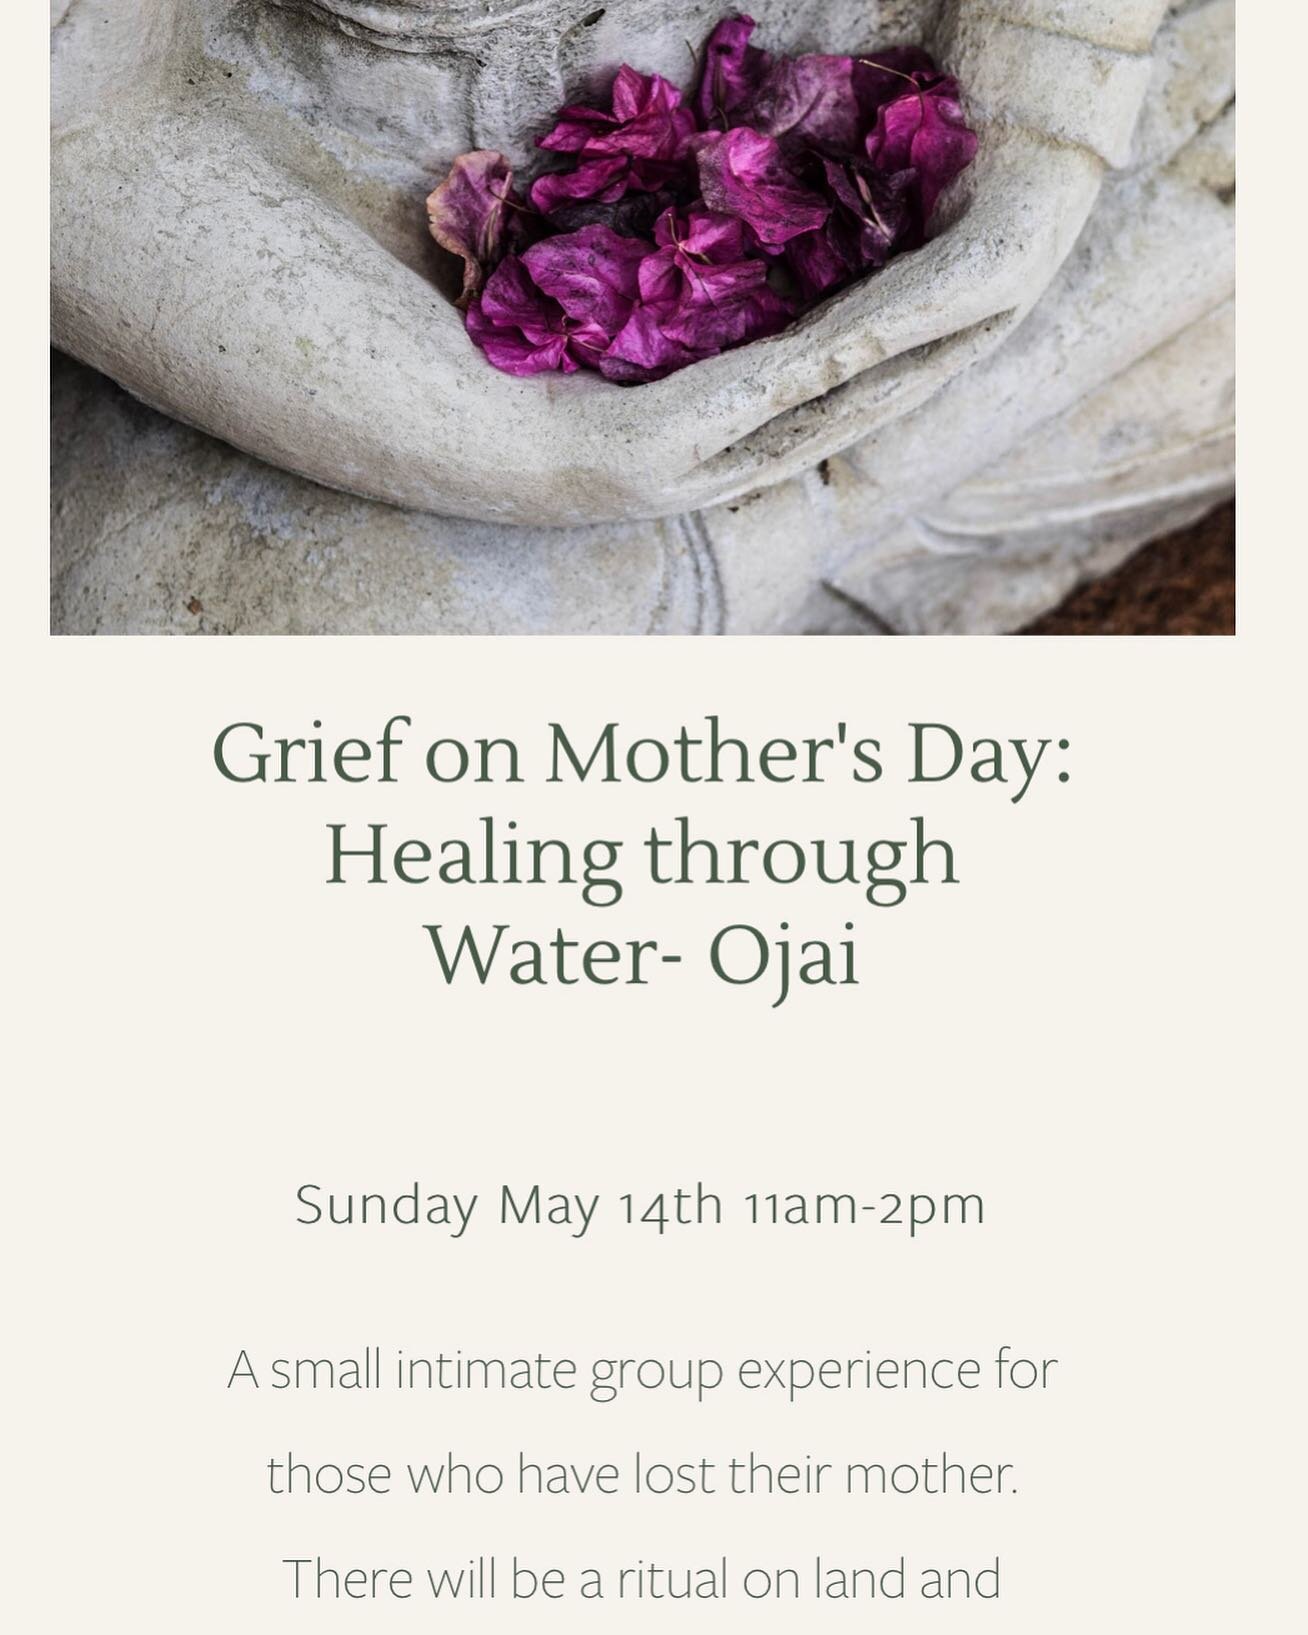 Death, loss, grief is a part of our experience. Water is intrinsically connected to these ebbs and flows. 

Hosting an intimate water healing ceremony on Mother&rsquo;s Day for those who have lost their mother. 

Few spaces left. DM for waitlist is s